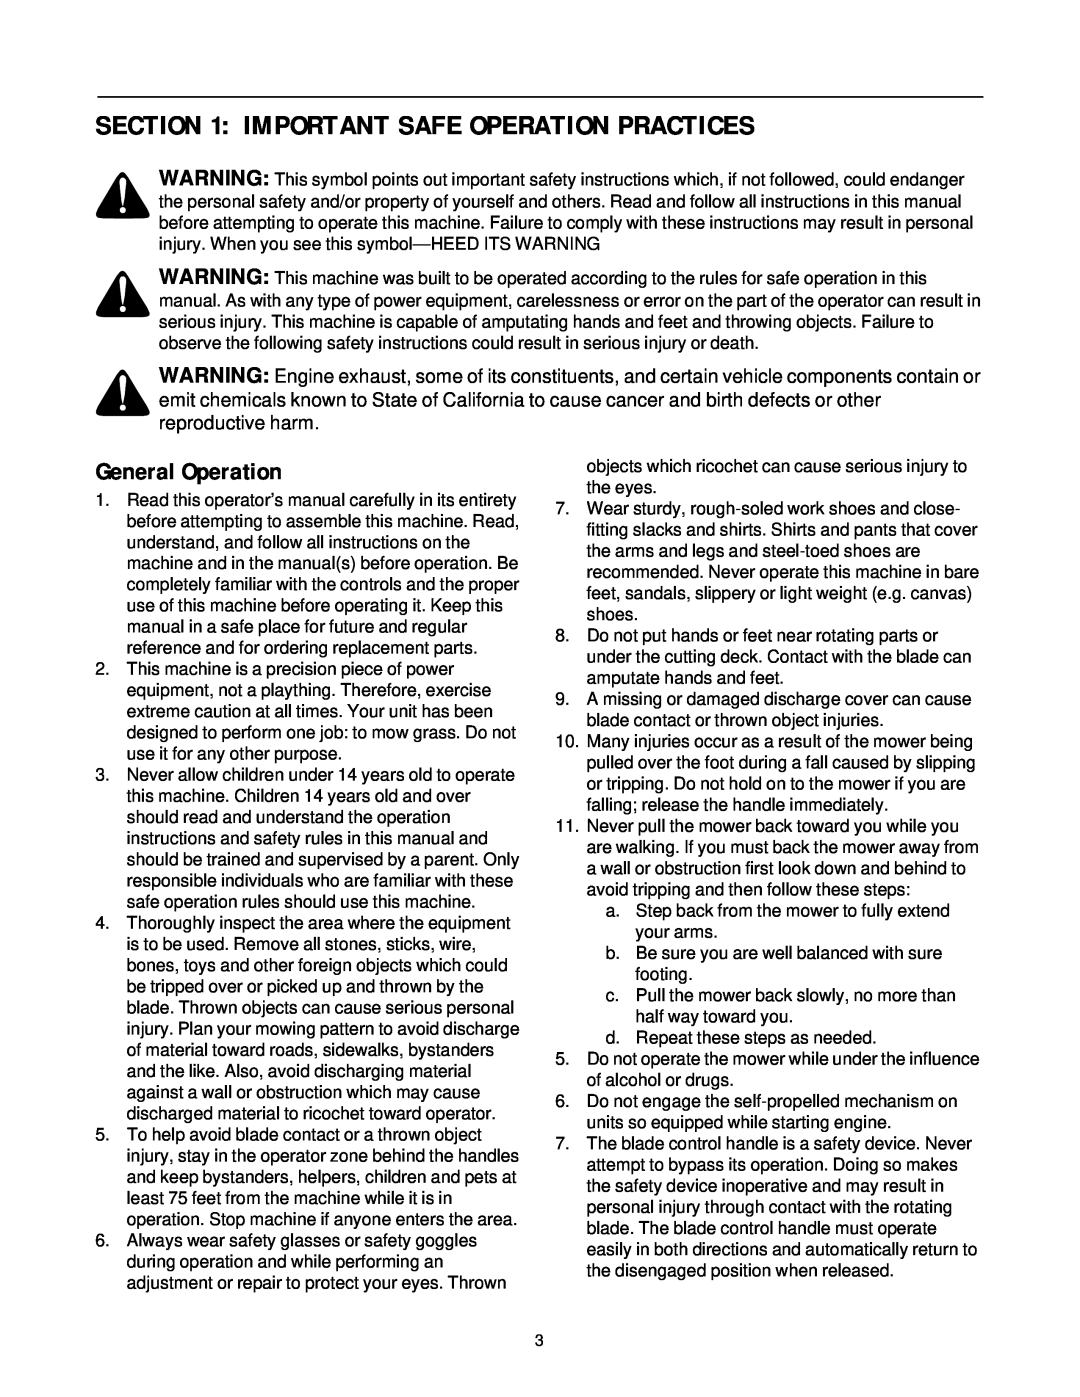 Yard-Man 435 manual Important Safe Operation Practices, General Operation 